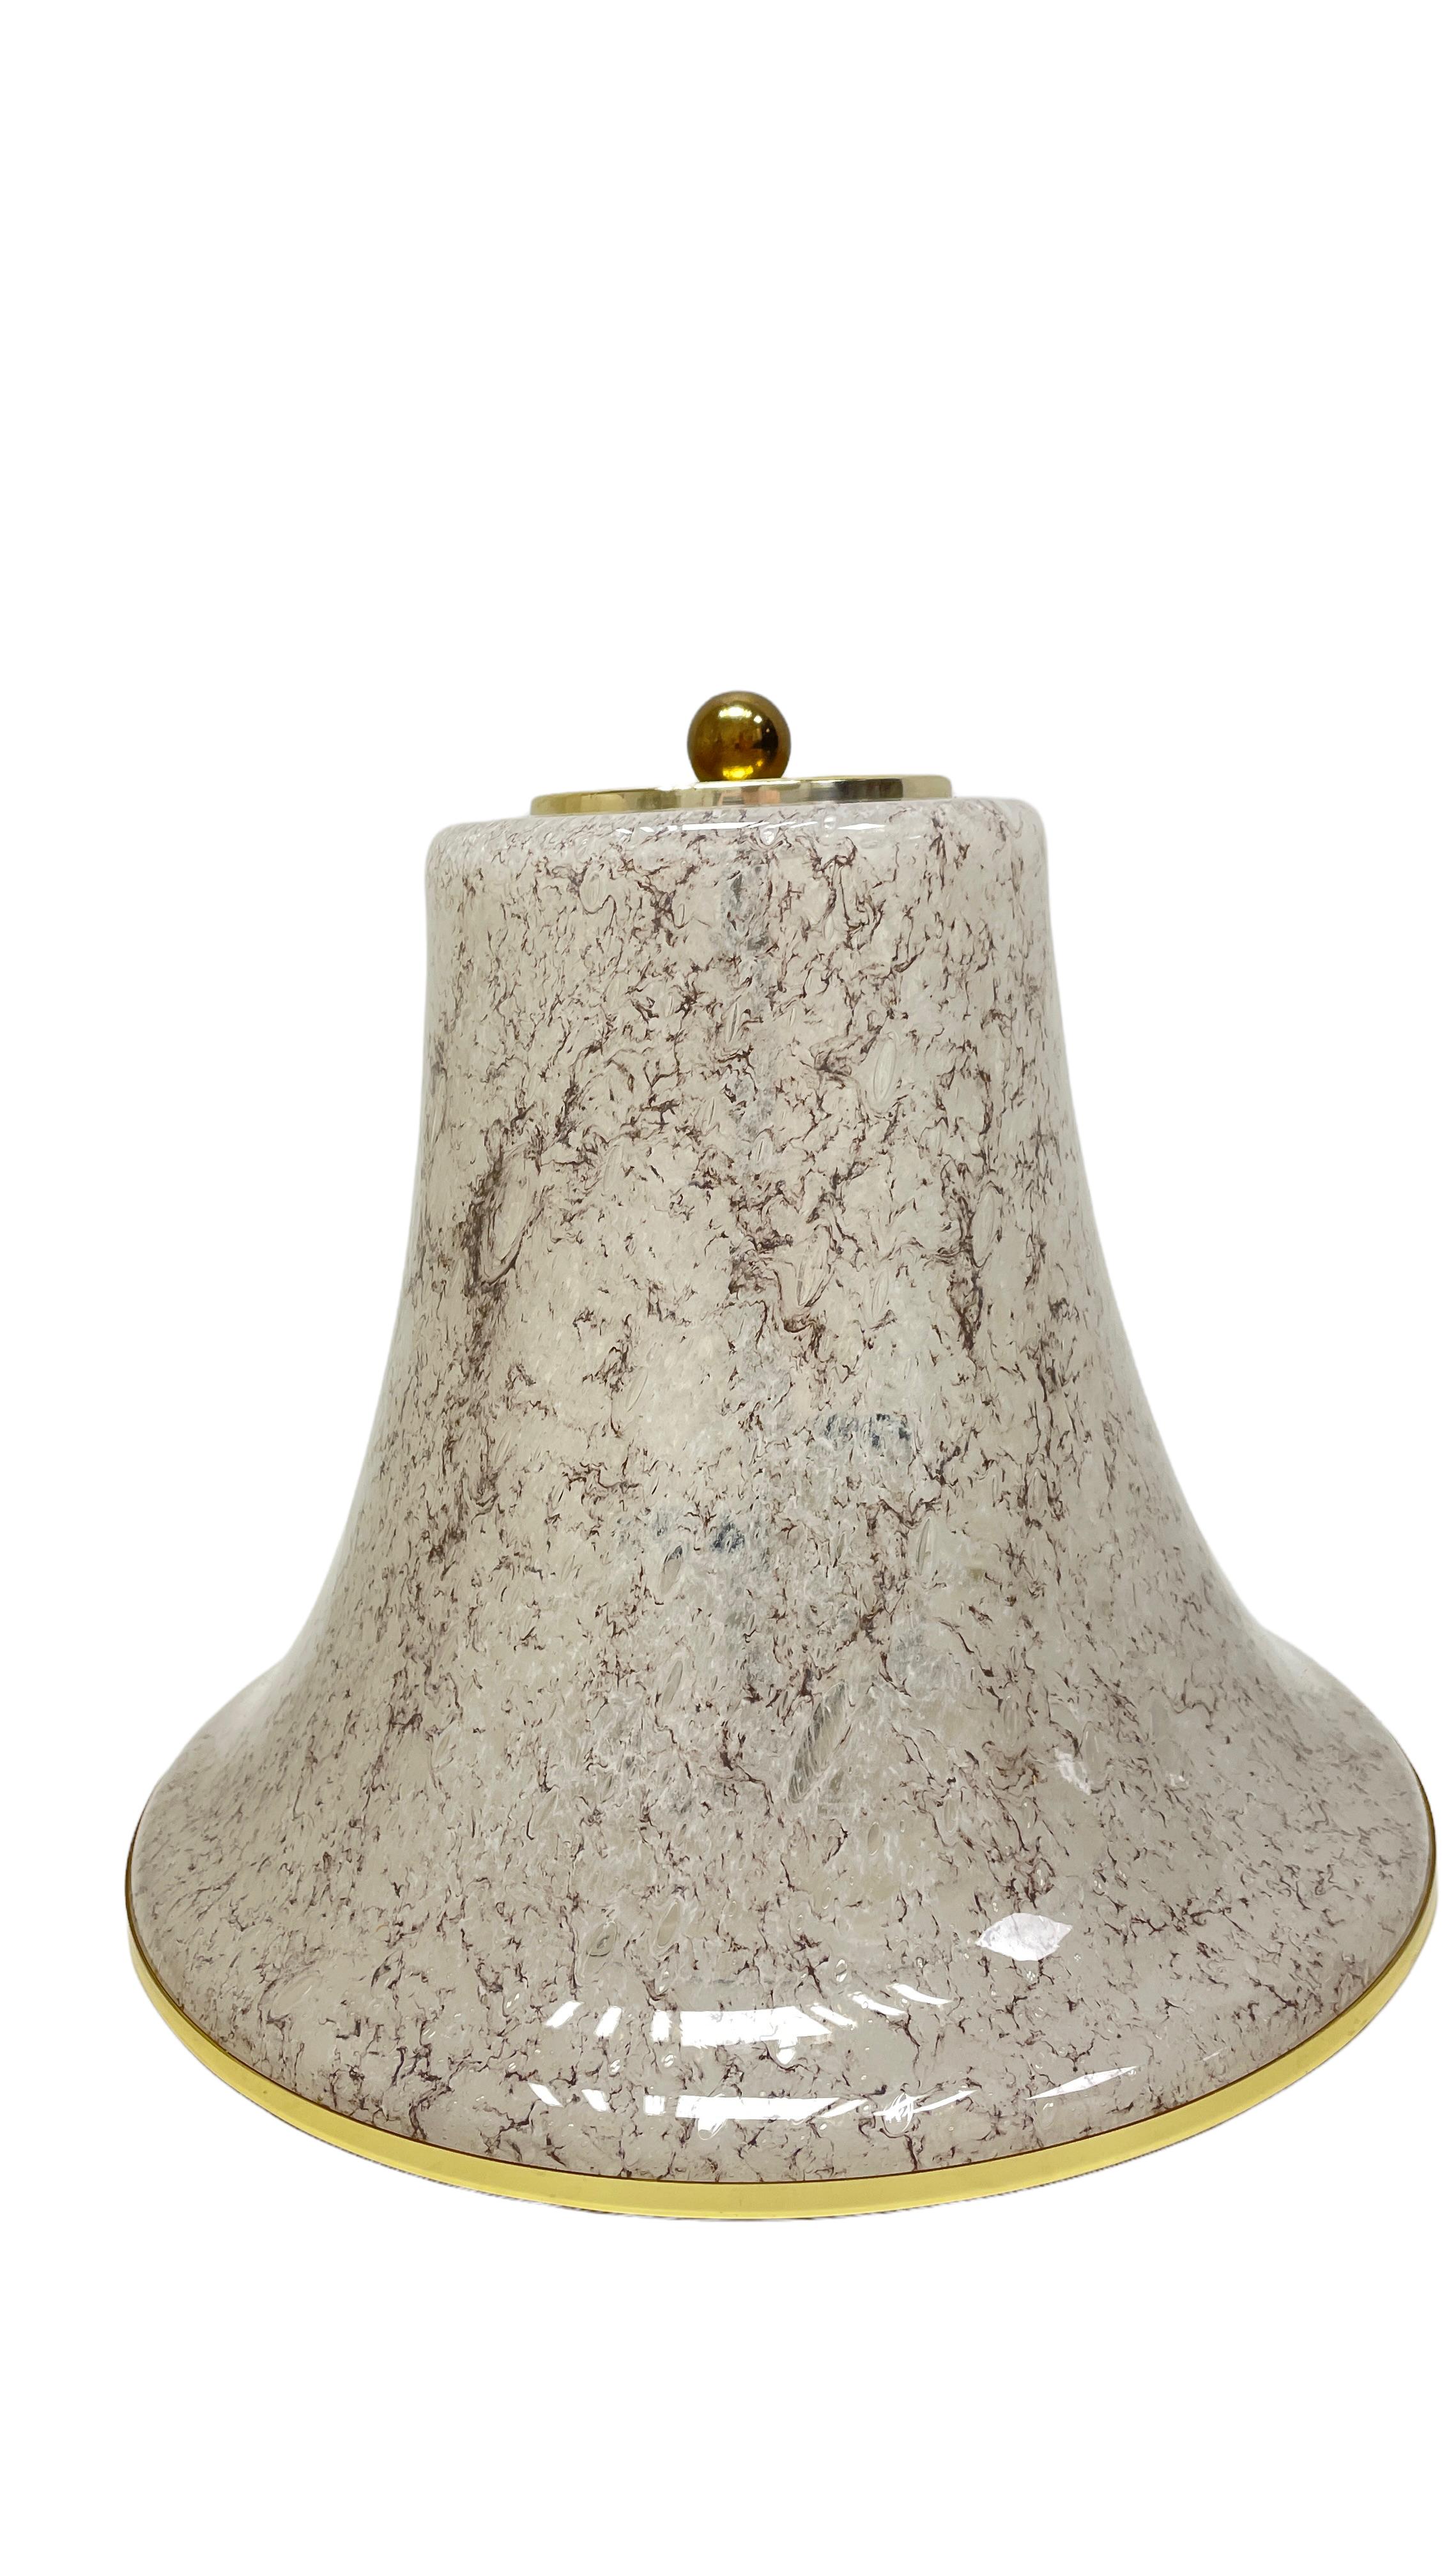 Midcentury Doria flush mount, structured glass in the shape of a bell, with a golden rim. The Fixture requires two European E14 / 110 Volt Candelabra bulbs, each bulb up to 40 watts. A nice addition to any room.